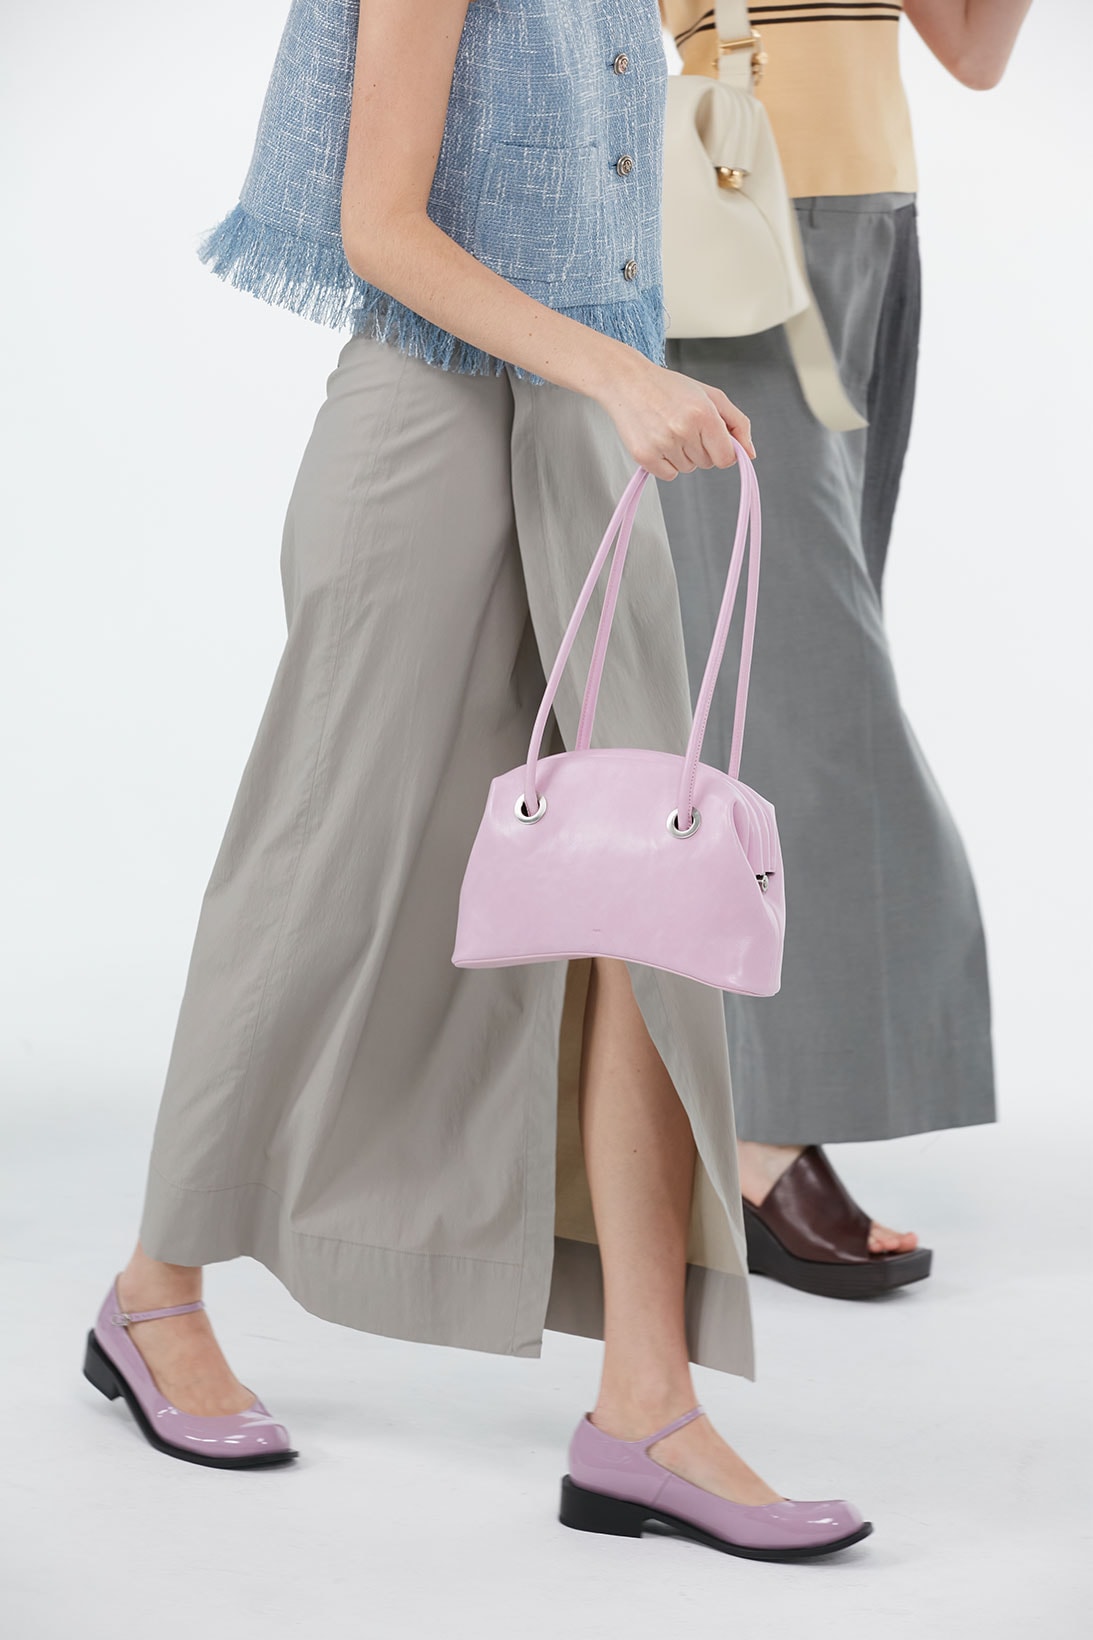 osoi spring summer ss21 collection campaign hustle and bustle shoulder handbags